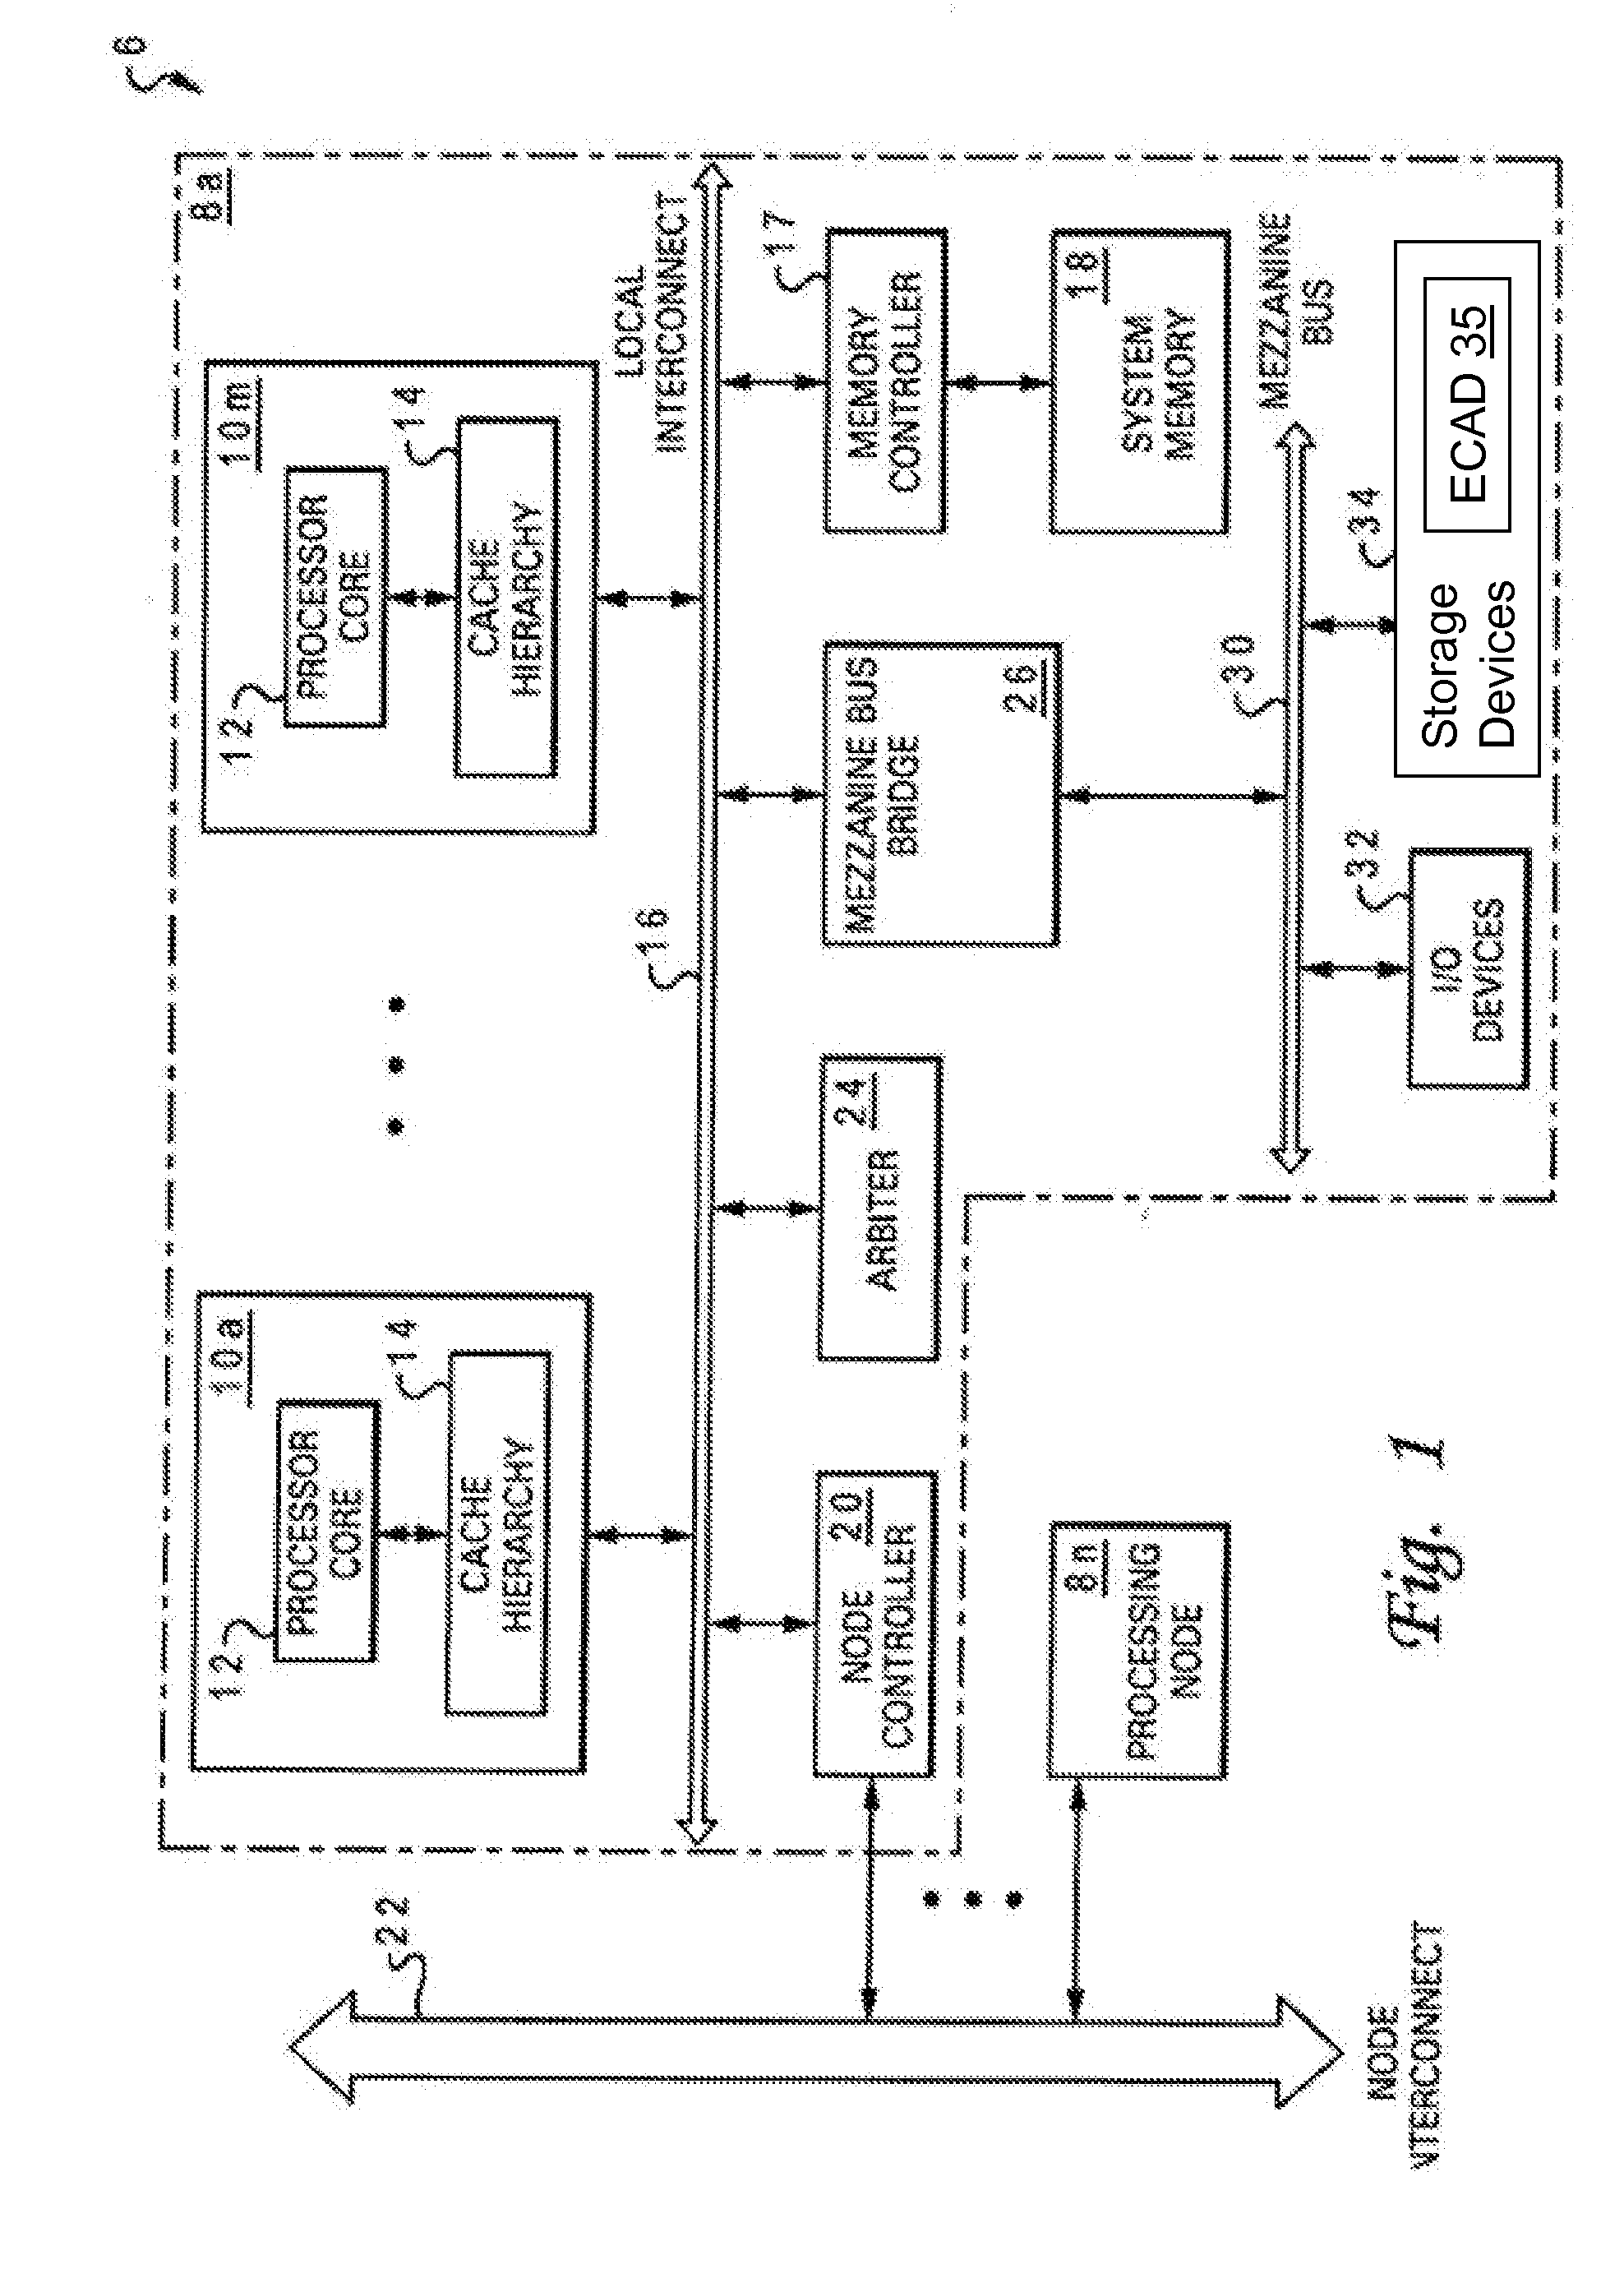 Method, system and program product for providing a configuration specification language supporting selective presentation of configuration entities